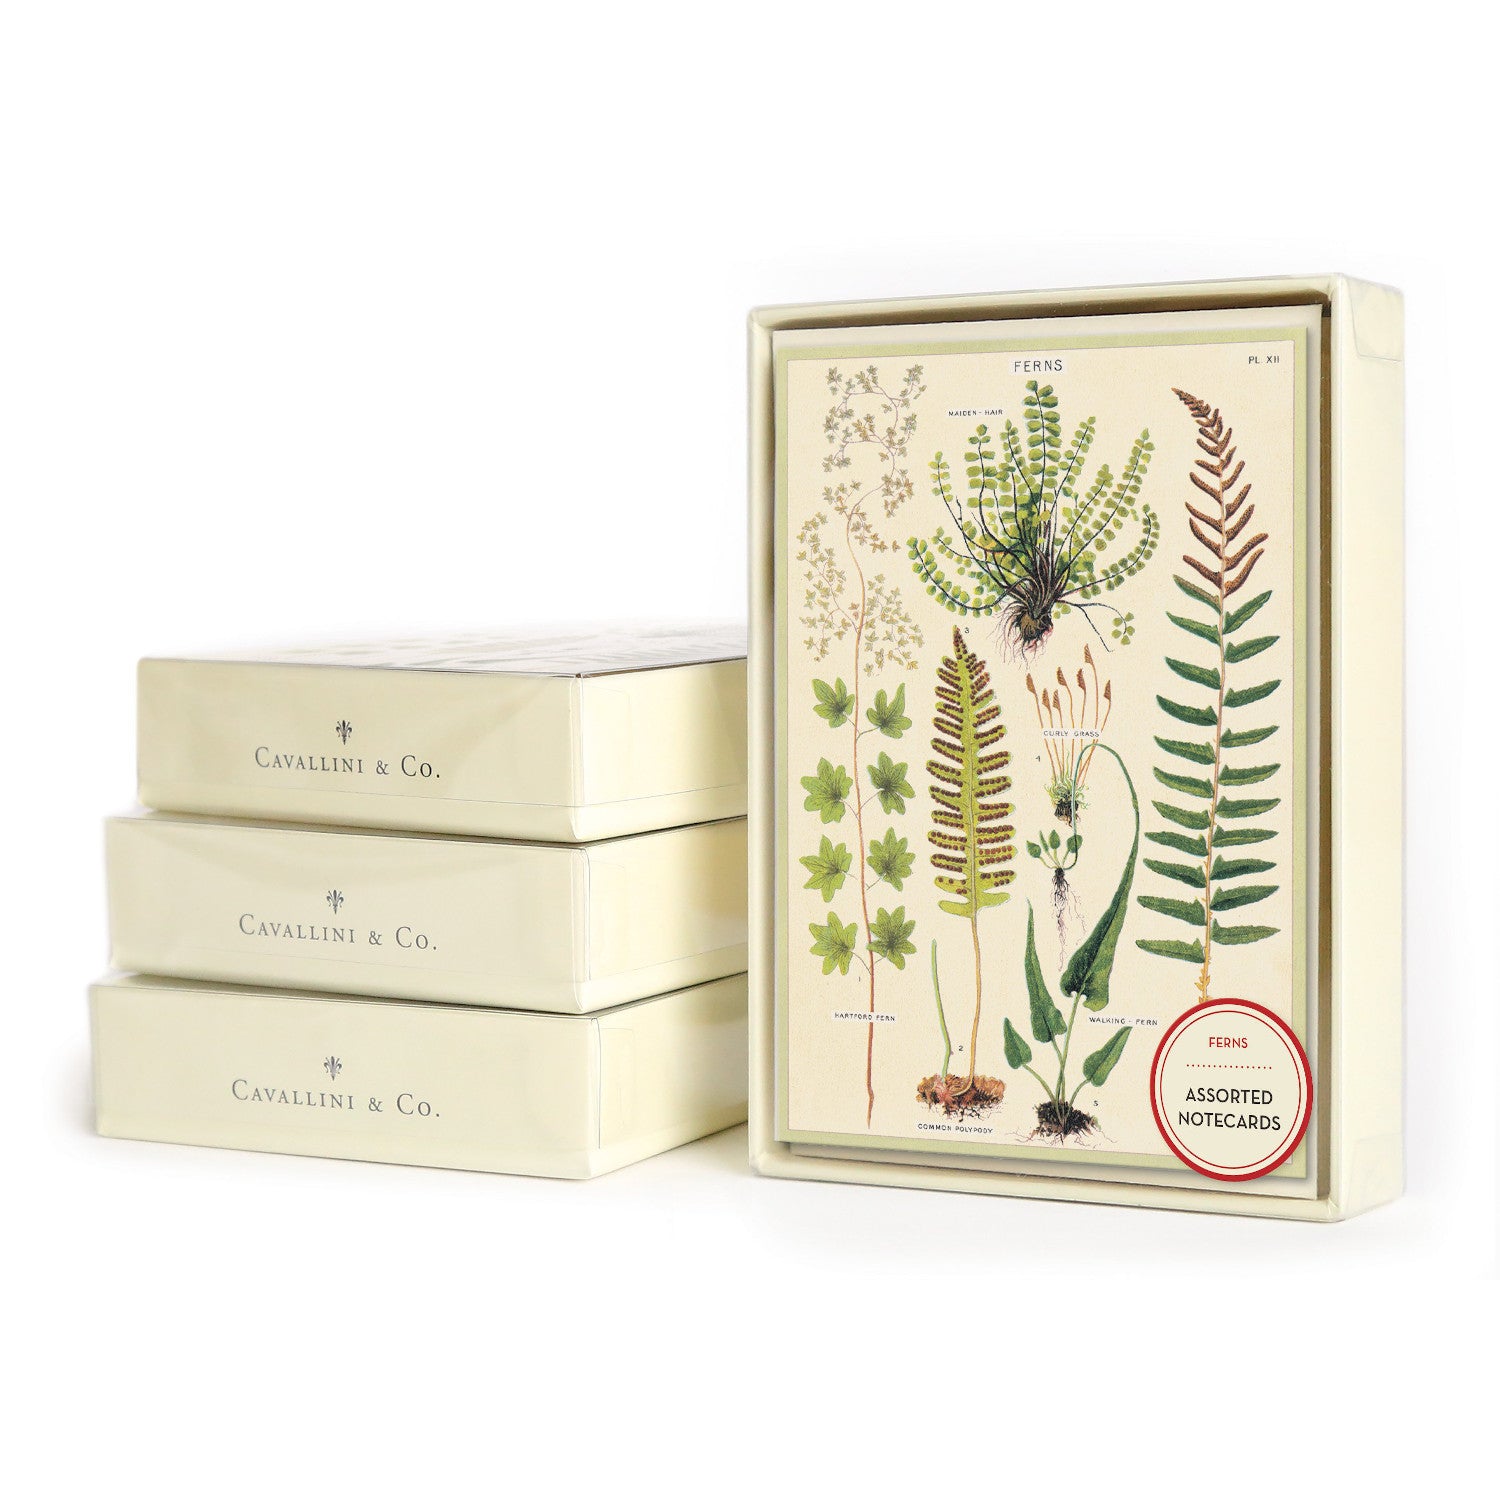 A stack of Cavallini Papers &amp; Co. Ferns Notecards Set of 8 with vintage botanical designs against a white background.